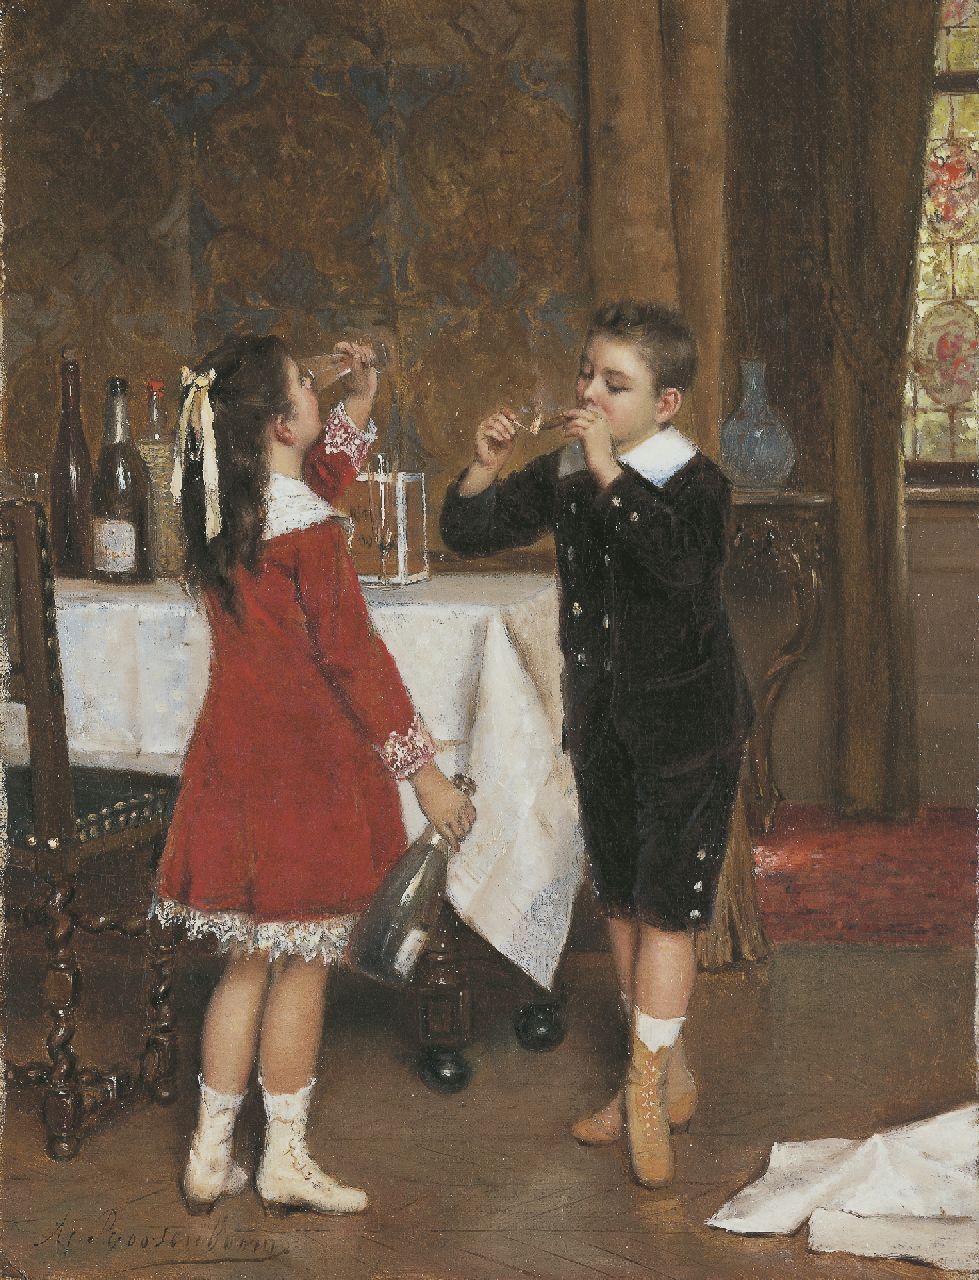 Roosenboom A.  | Albert Roosenboom, After the party, oil on canvas 34.2 x 26.4 cm, signed l.l. and dated 1882 on the reverse